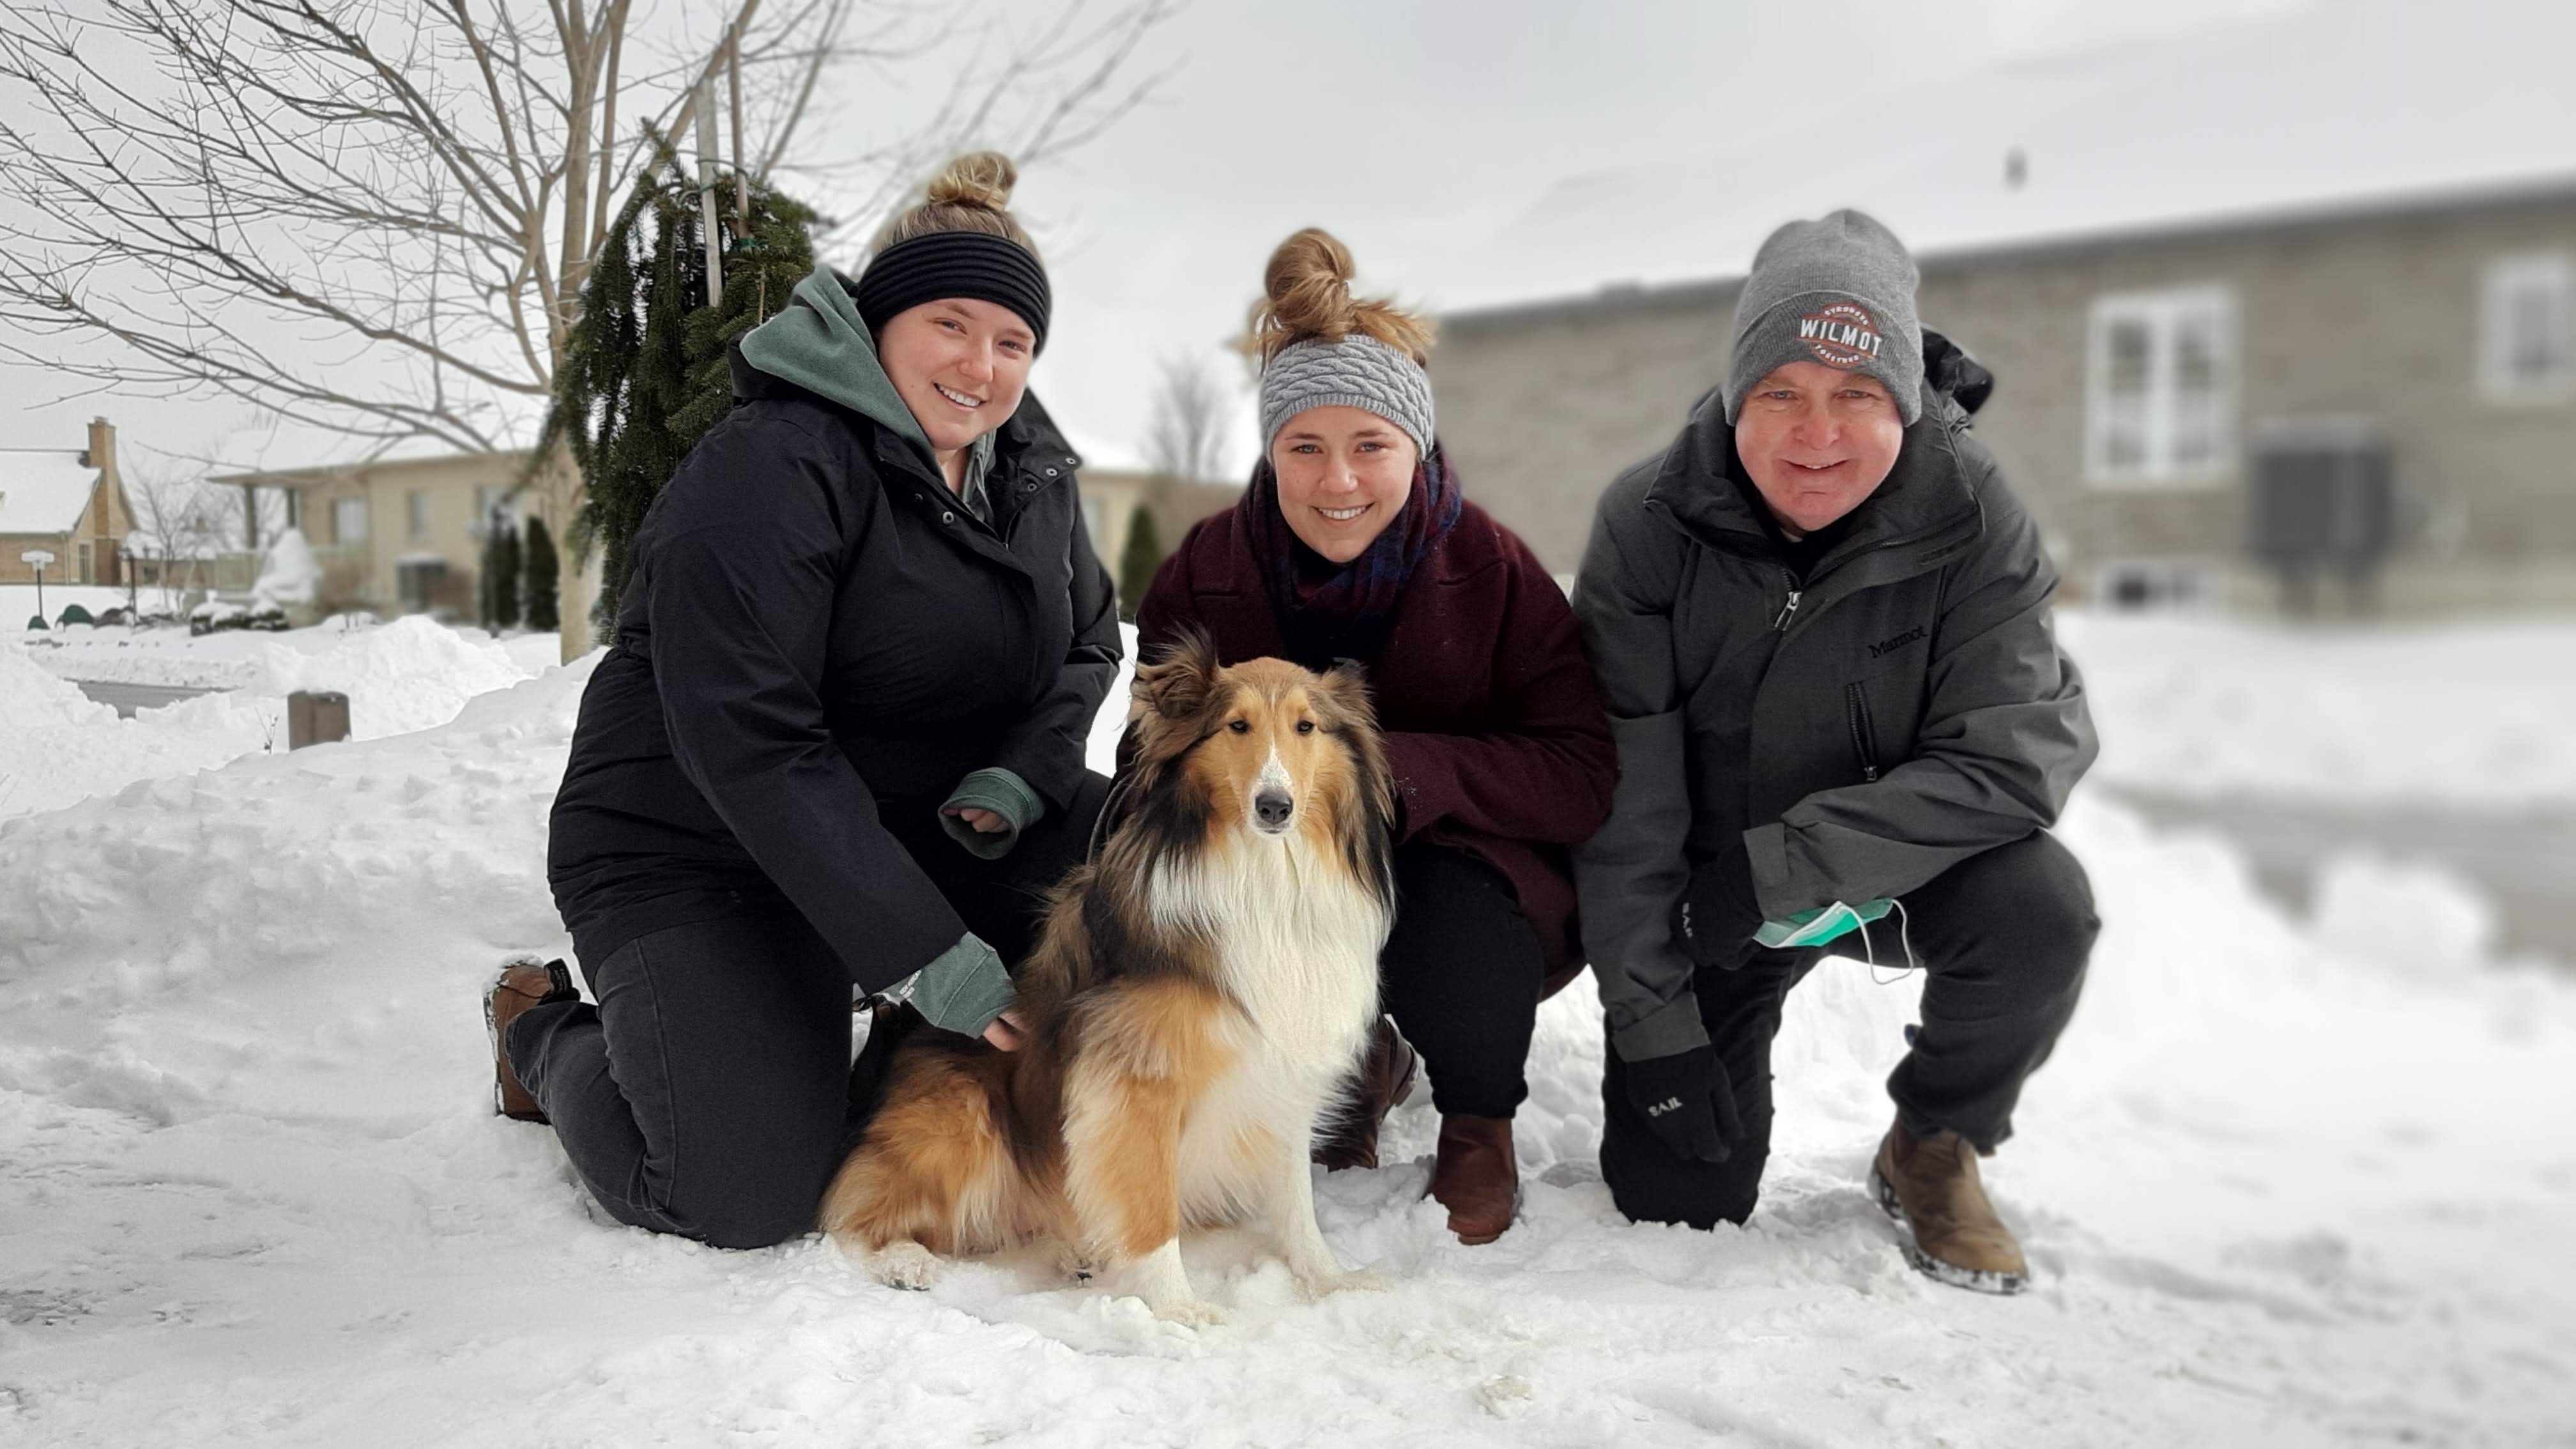 Blythe, Meghan and Paul Mackie said that Islay the Sheltie is good for the family’s mental and physical health. “We’re all pretty much on the same page with the positive aspects of having an active pet in the house during these awkward times."